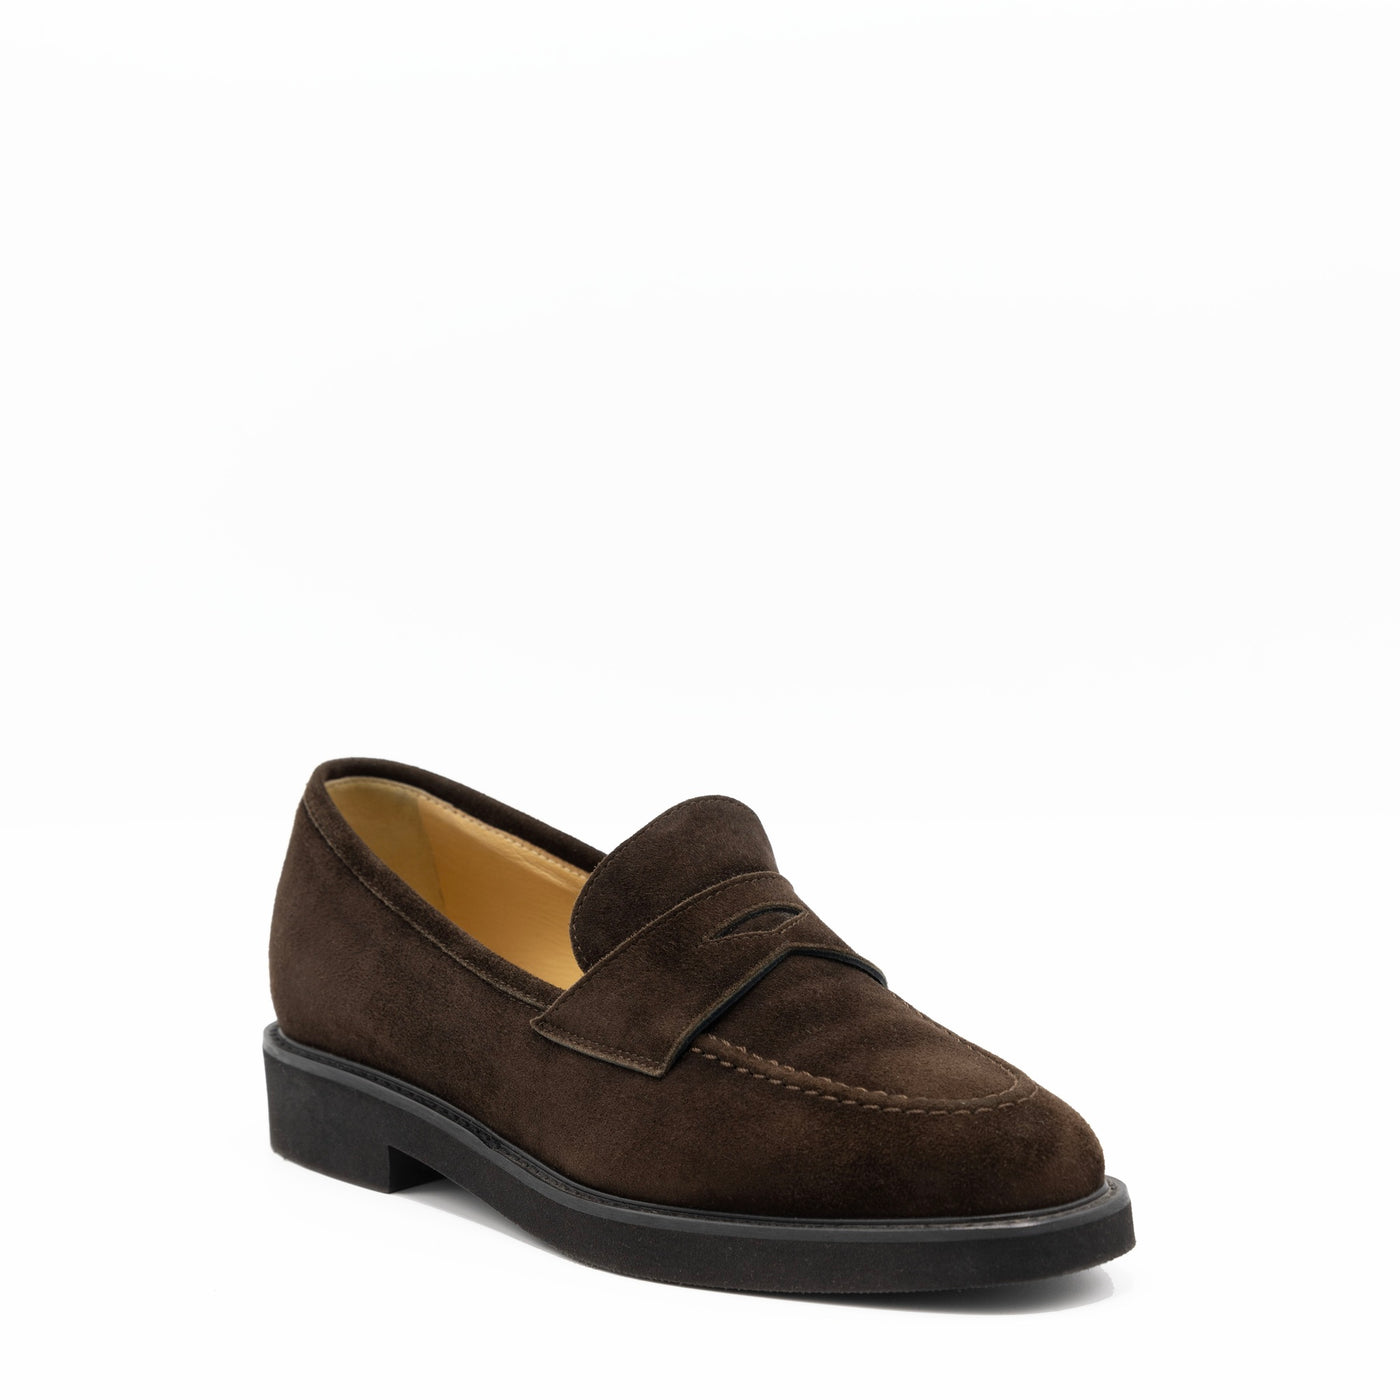 Women's brown suede penny loafers with rubber sole